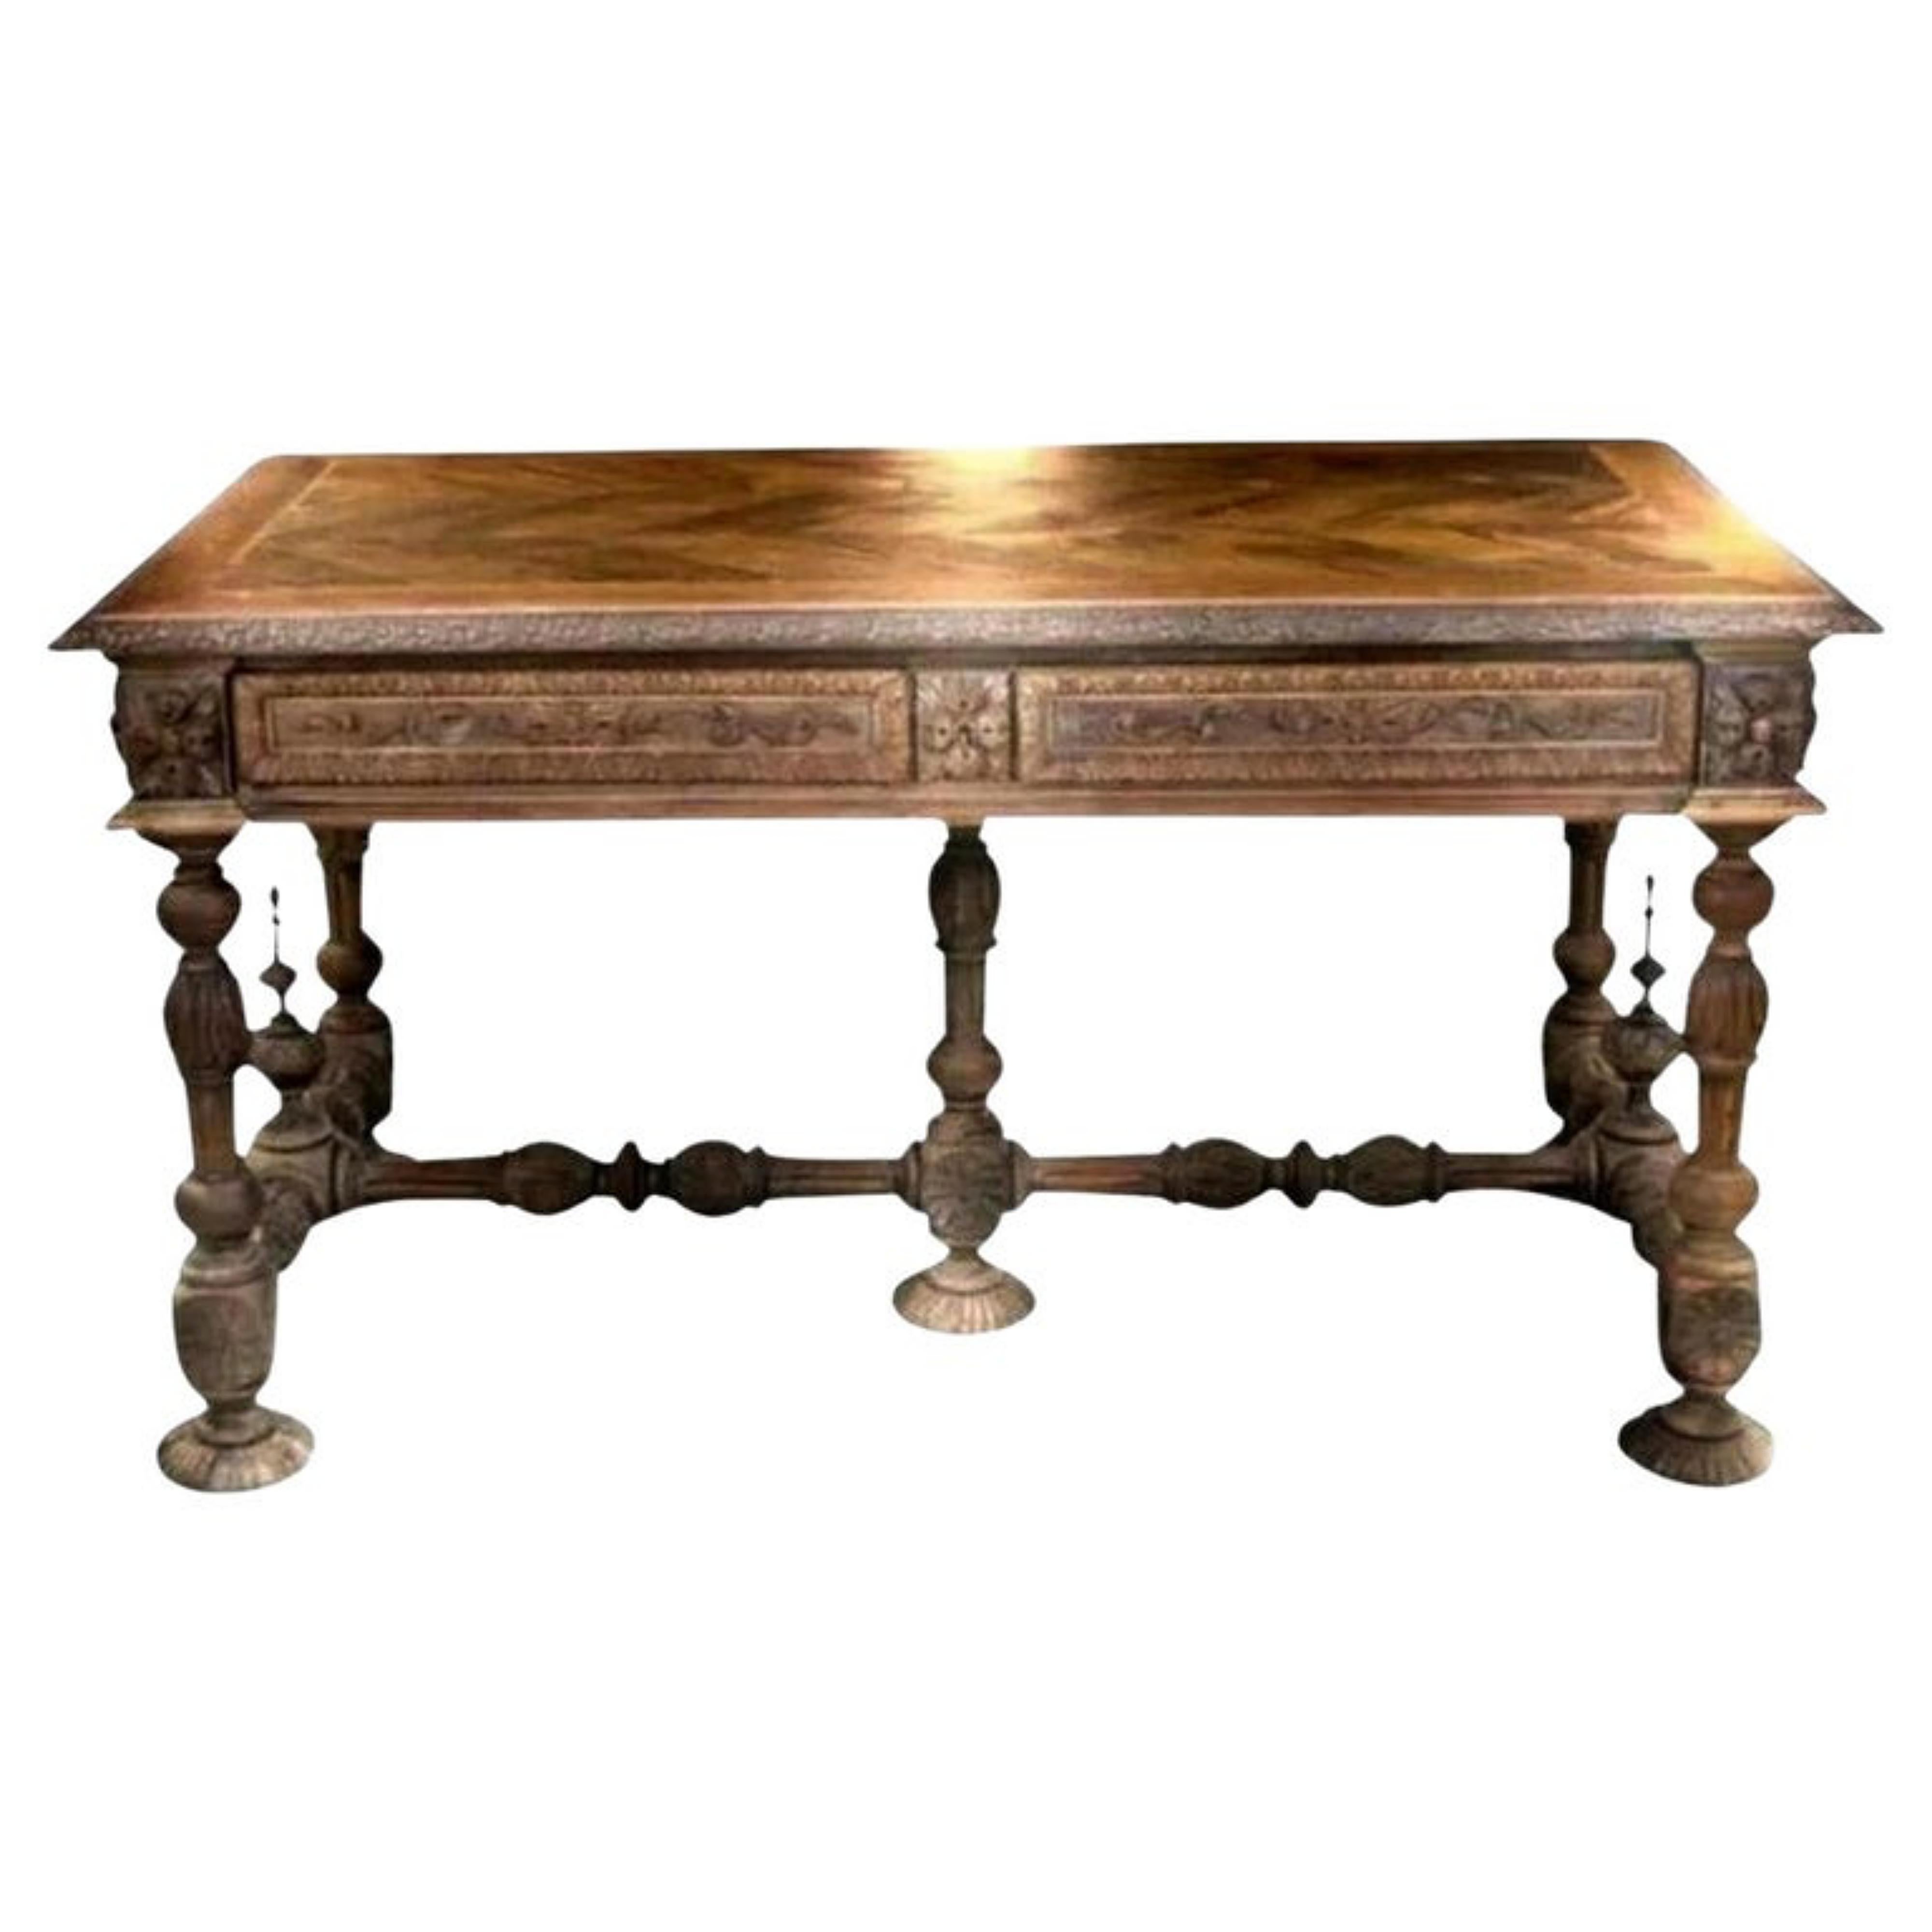 Italian Wood Table 19th Cent. Renaissance Style For Sale 5